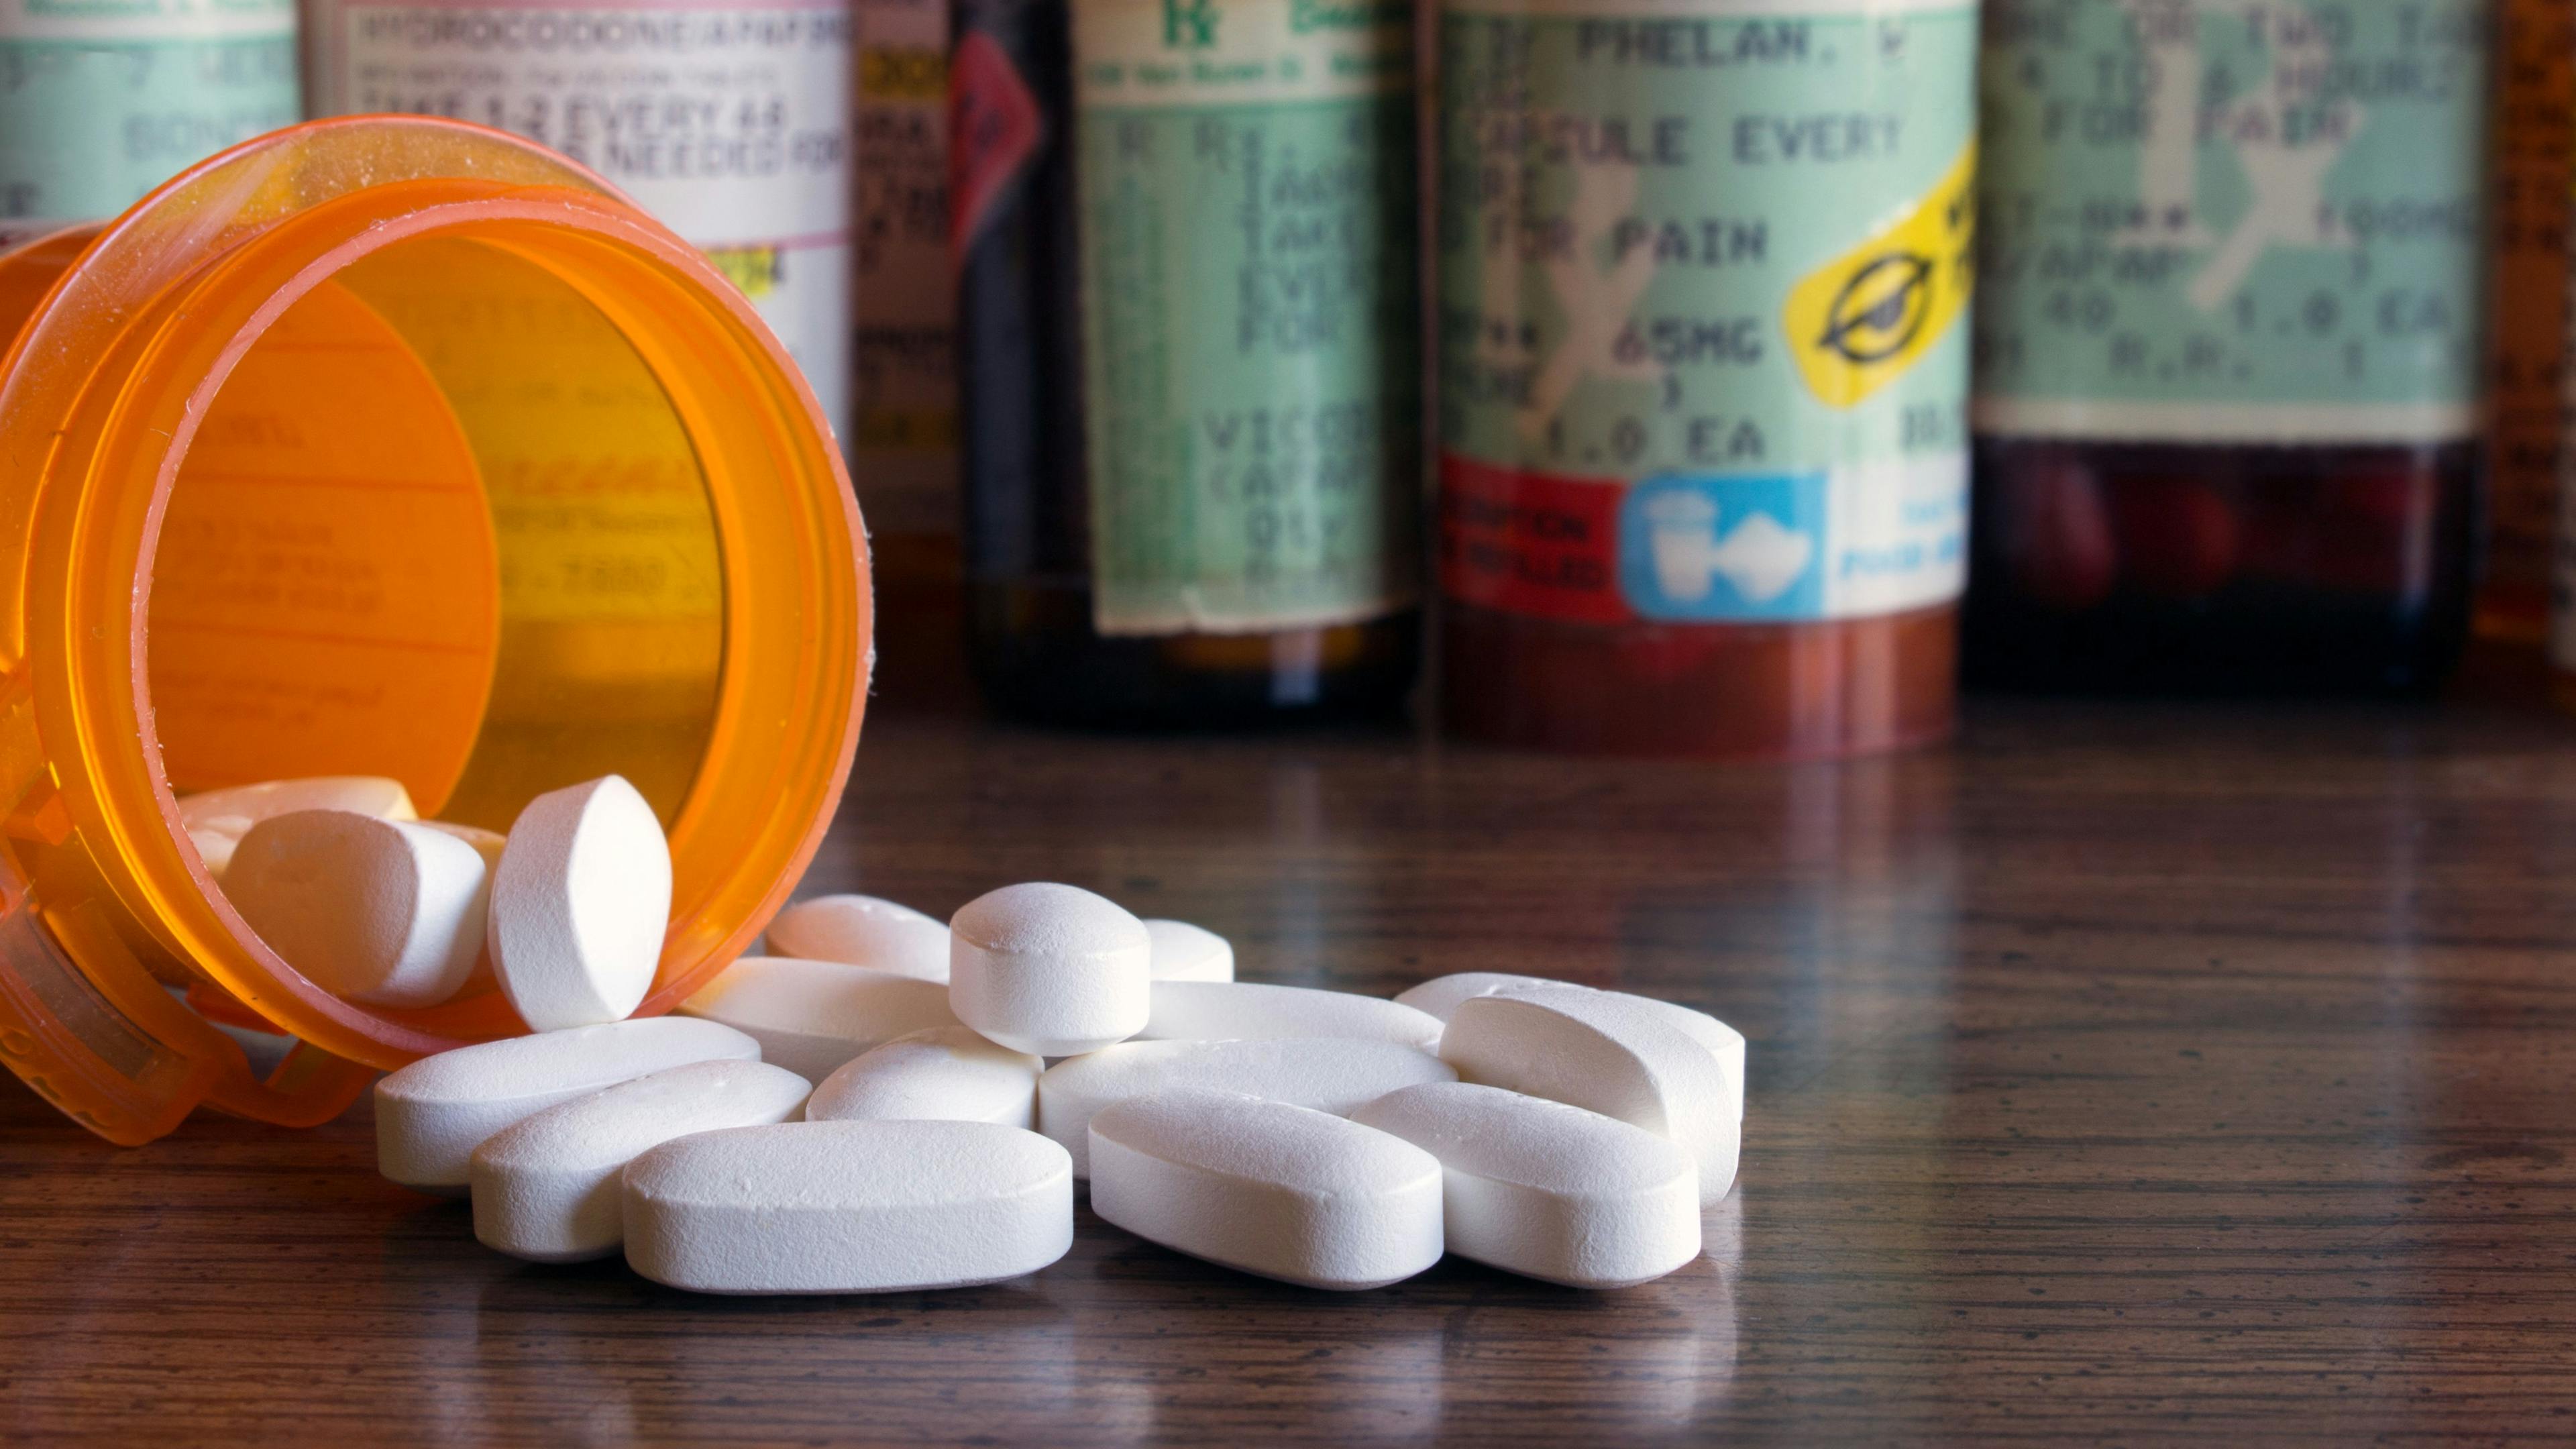 Commission on Opioid Crisis Calls for Changes in Marketing Pharmaceuticals, Managing Care